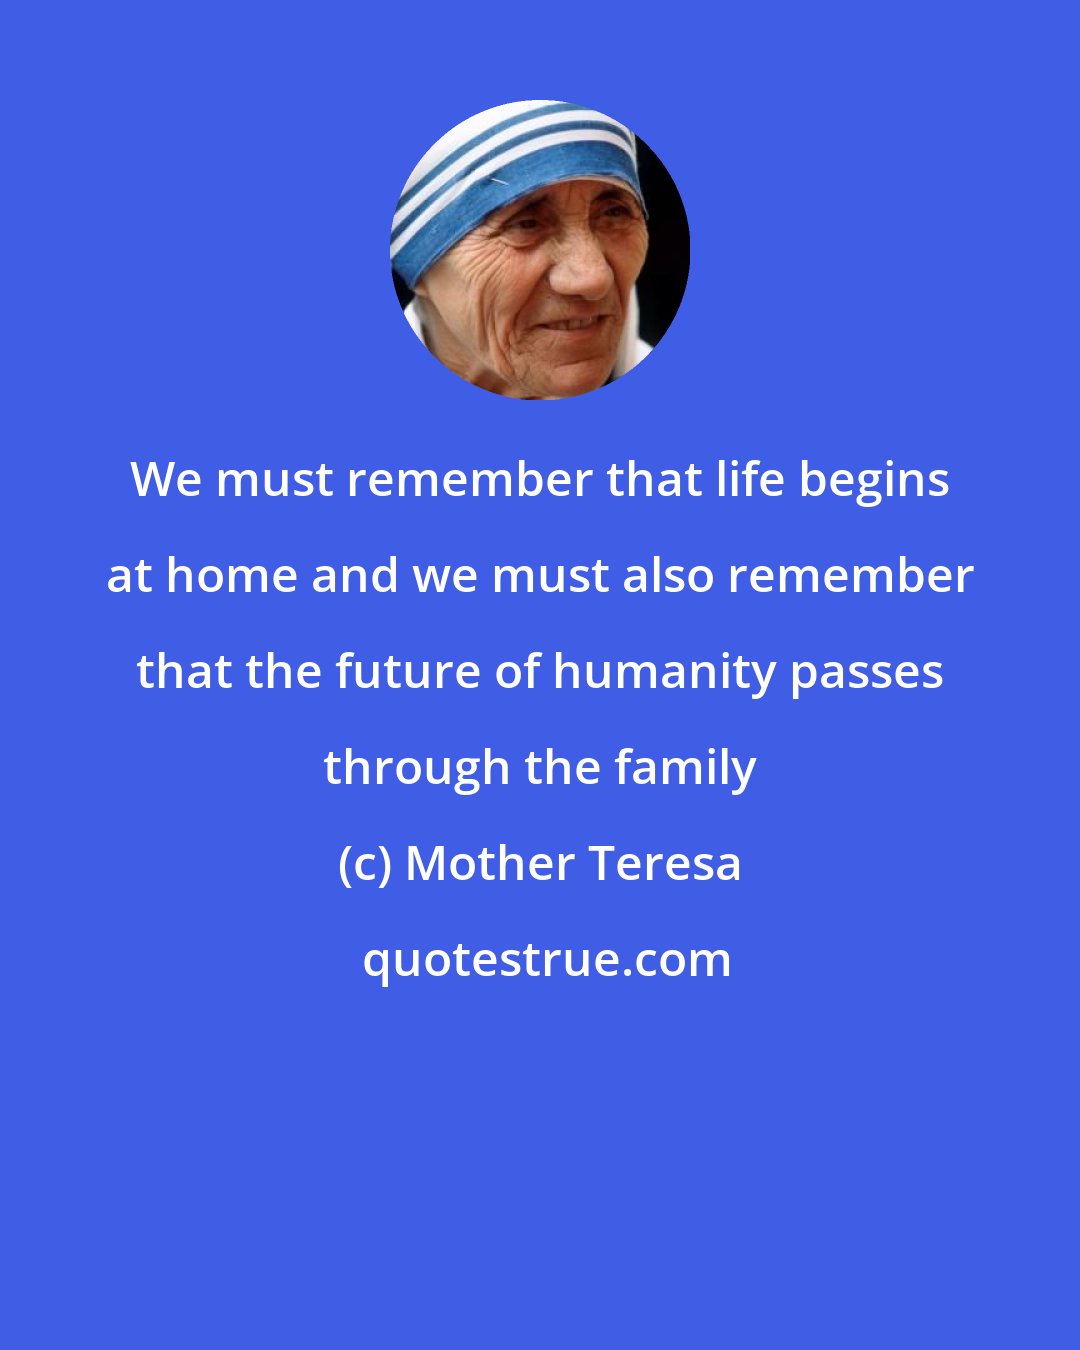 Mother Teresa: We must remember that life begins at home and we must also remember that the future of humanity passes through the family